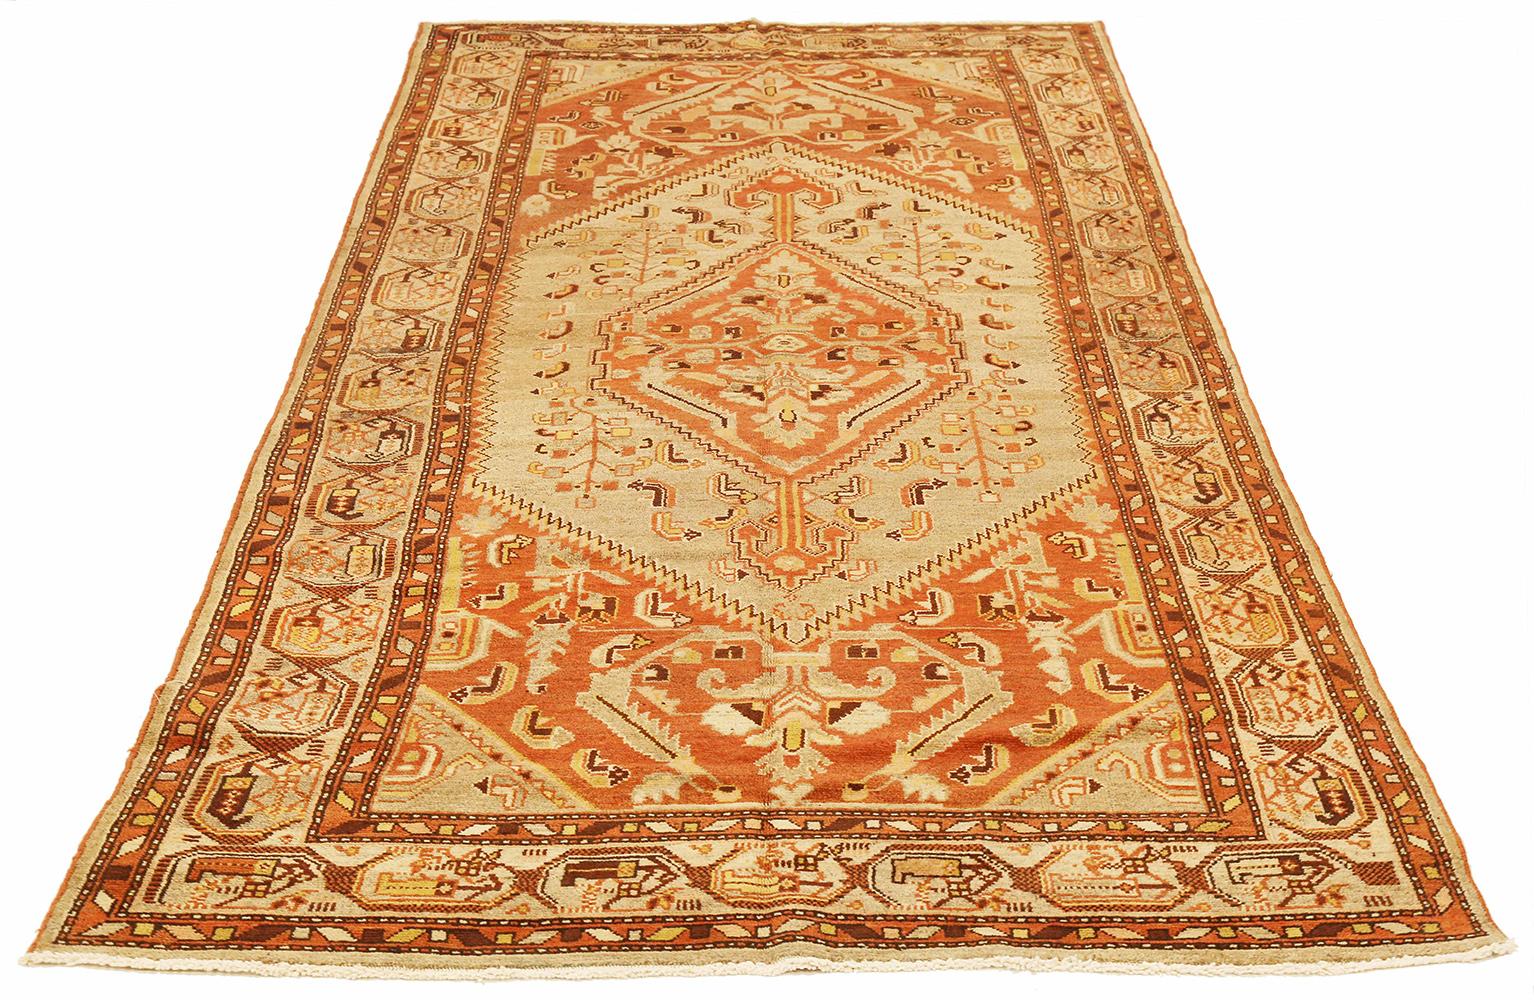 Antique Persian rug handwoven from the finest sheep’s wool and colored with all-natural vegetable dyes that are safe for humans and pets. It’s a traditional Khamseh design featuring a gorgeous mix of brown and ivory tribal details on an orange